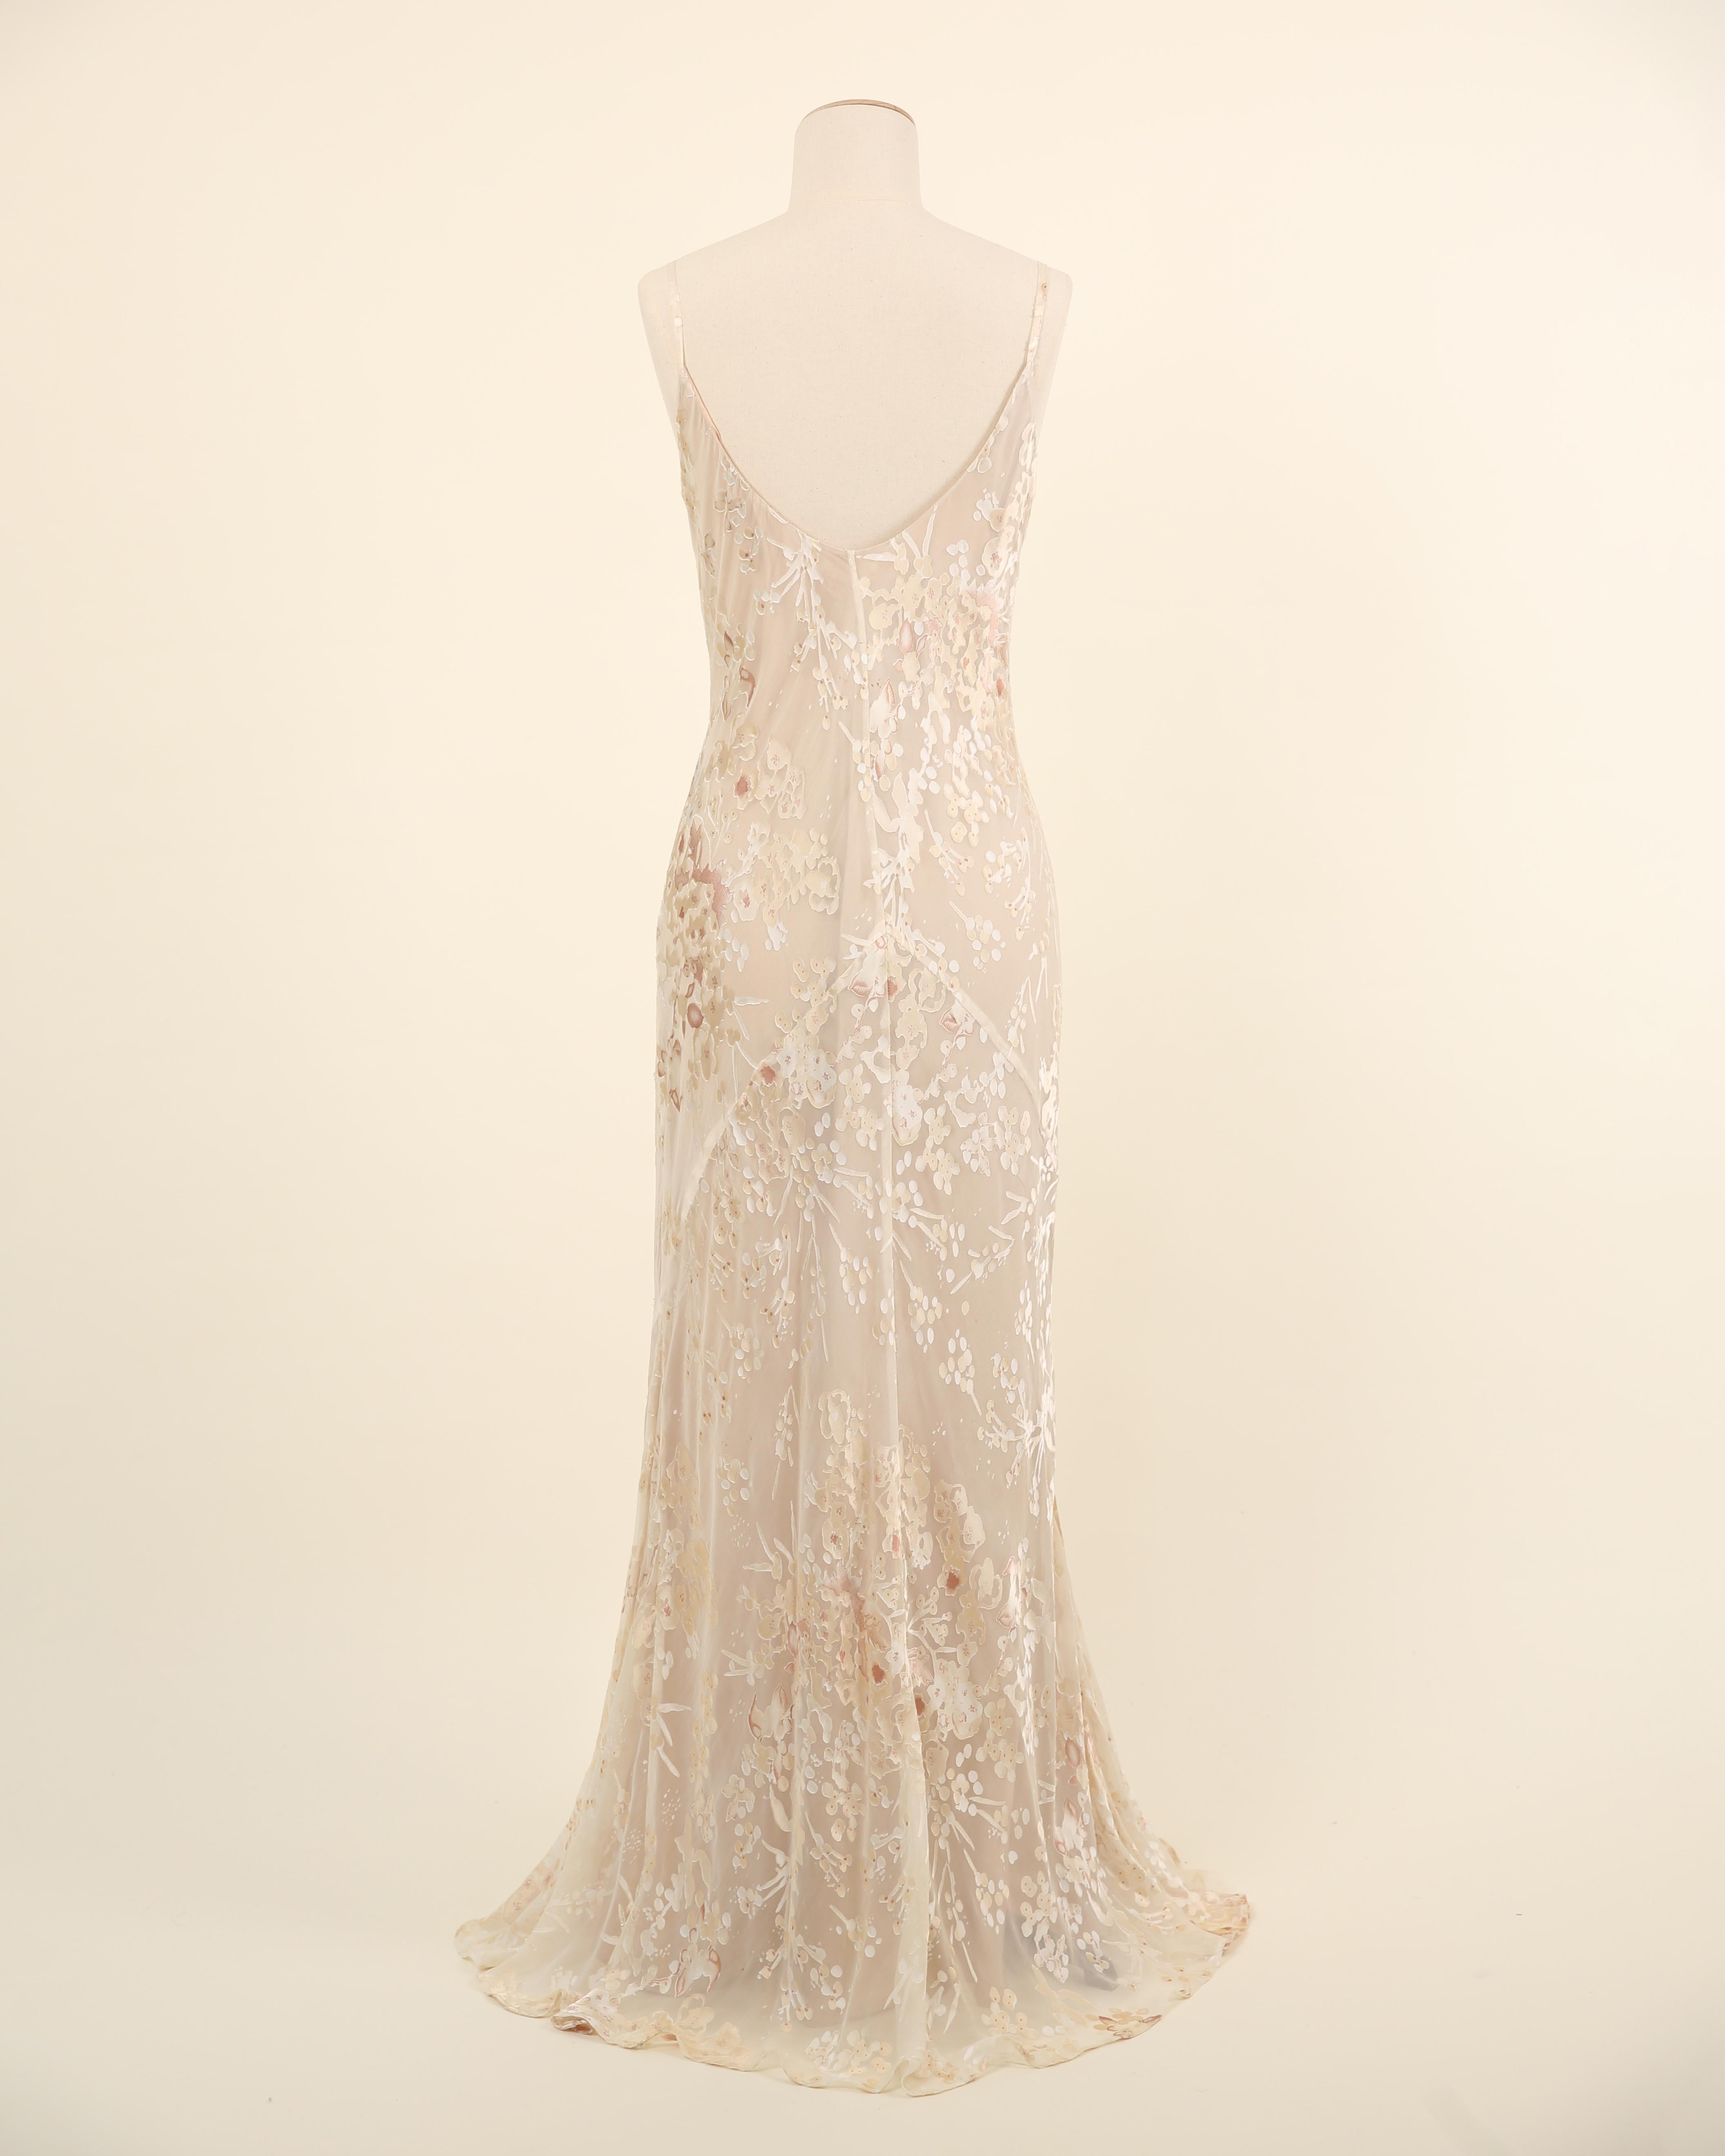 Vintage nude ivory beaded silk sheer floral layered wedding slip dress gown M L For Sale 2